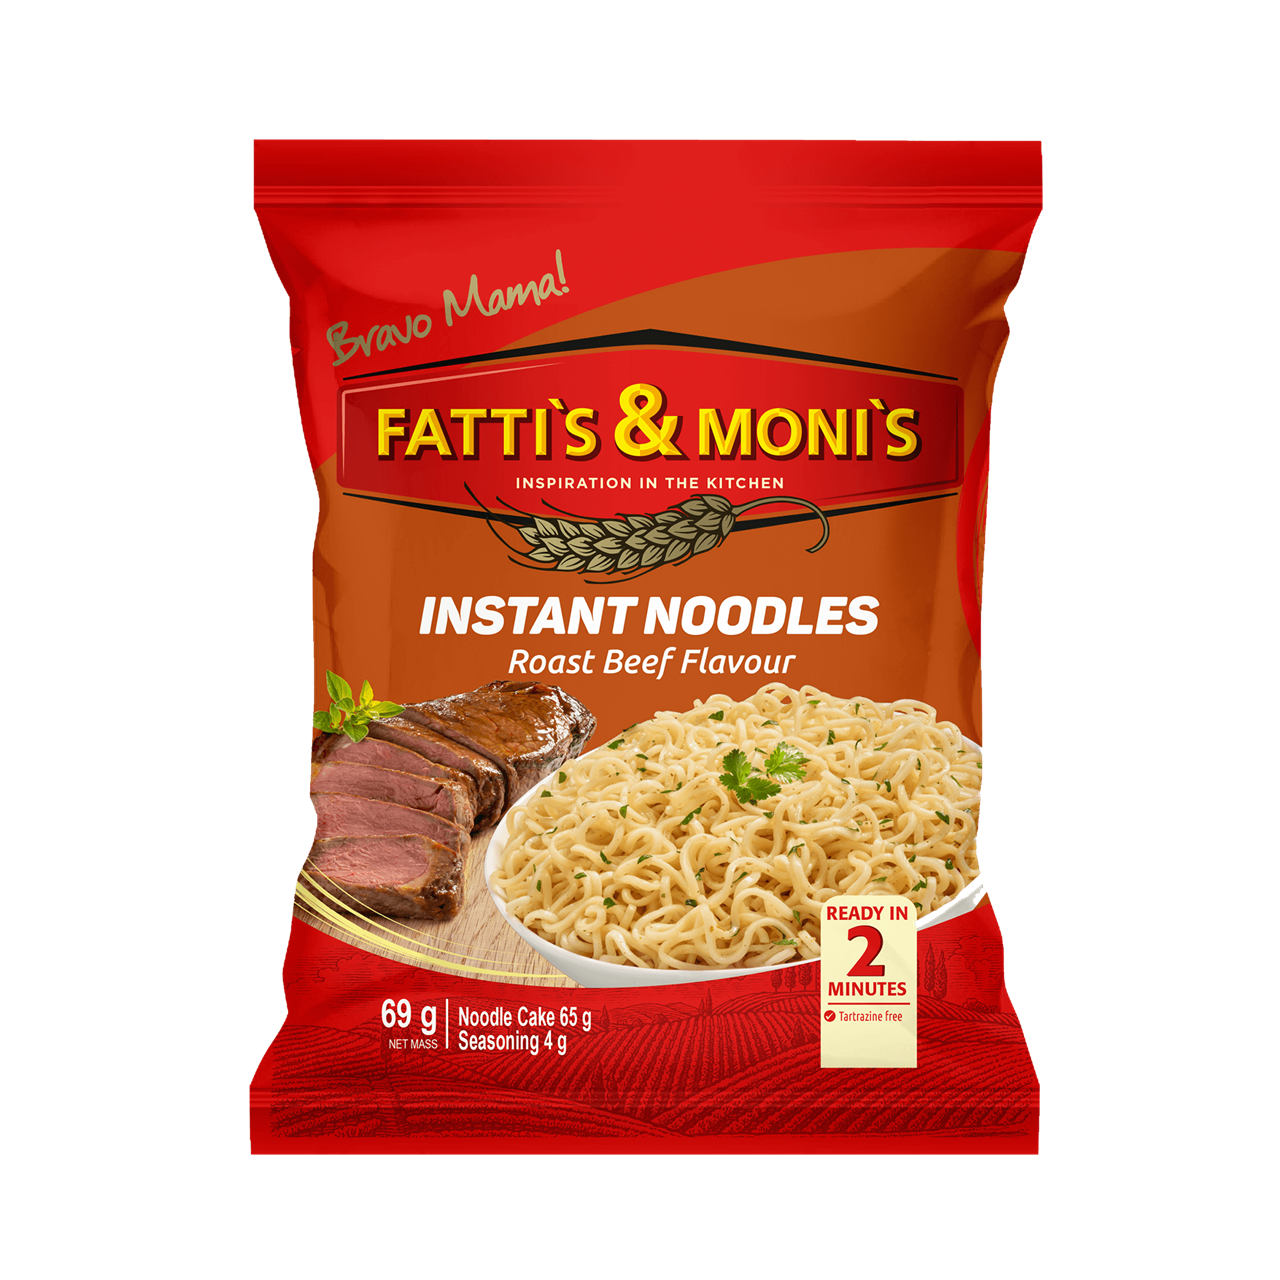 Fattis and Monis Instant Noodles Roast Beef